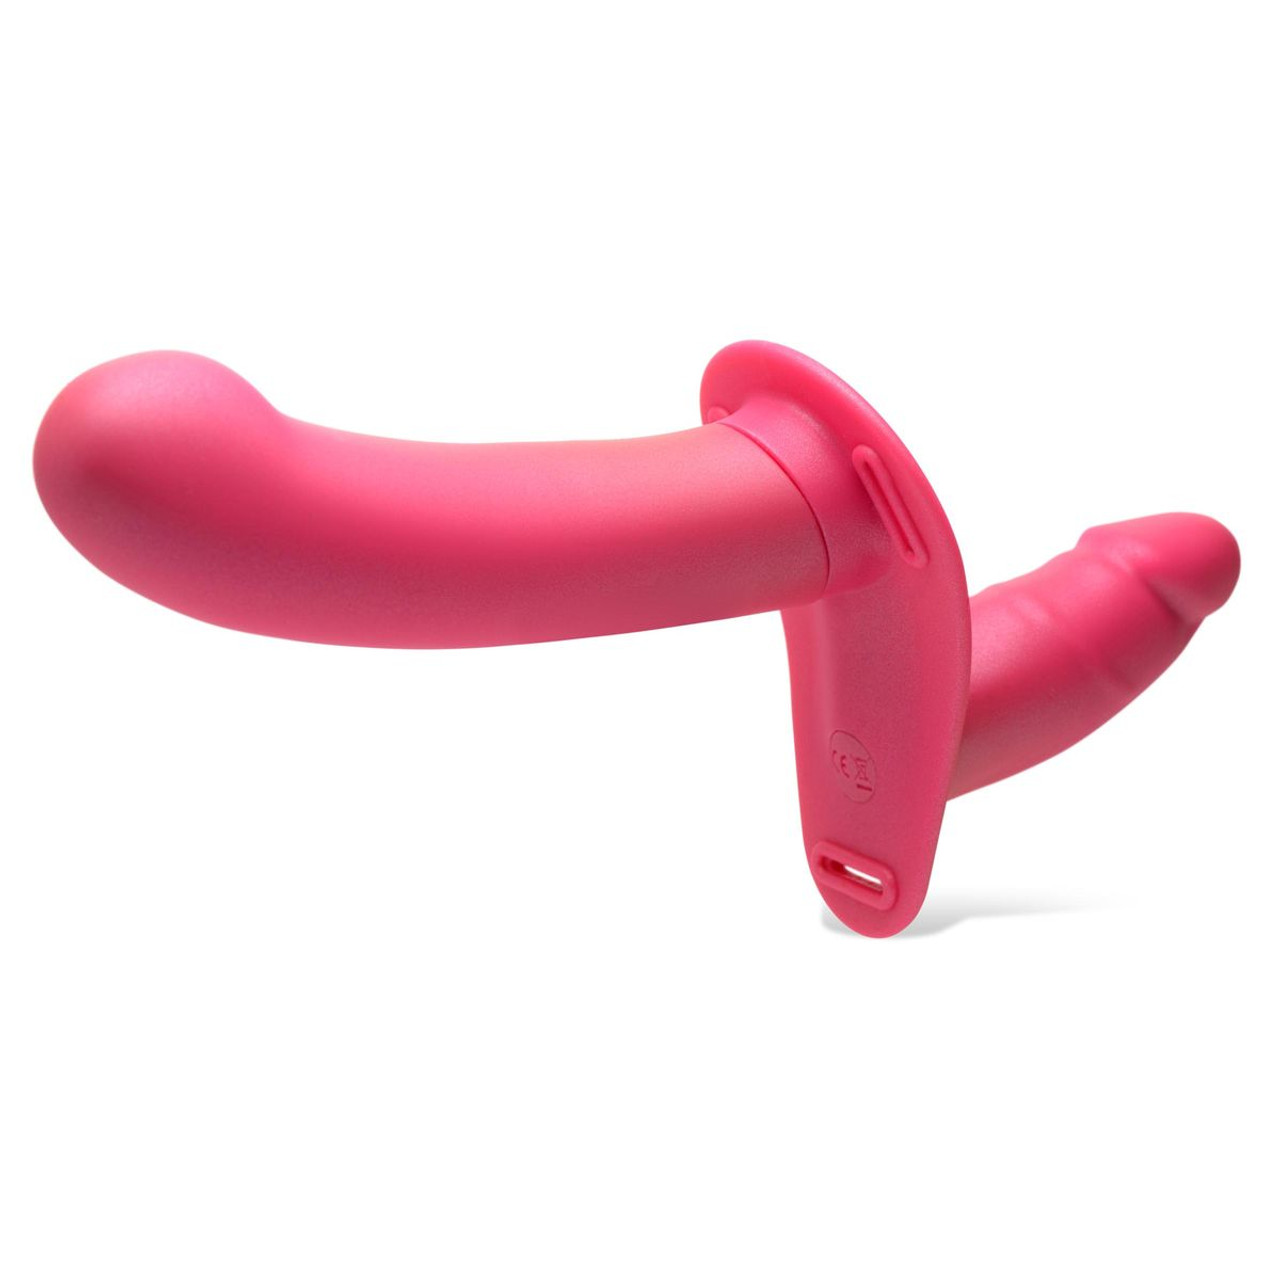 Strap U™ 28X Double Diva 1.5-Inch Dildo with Harness & Remote product image